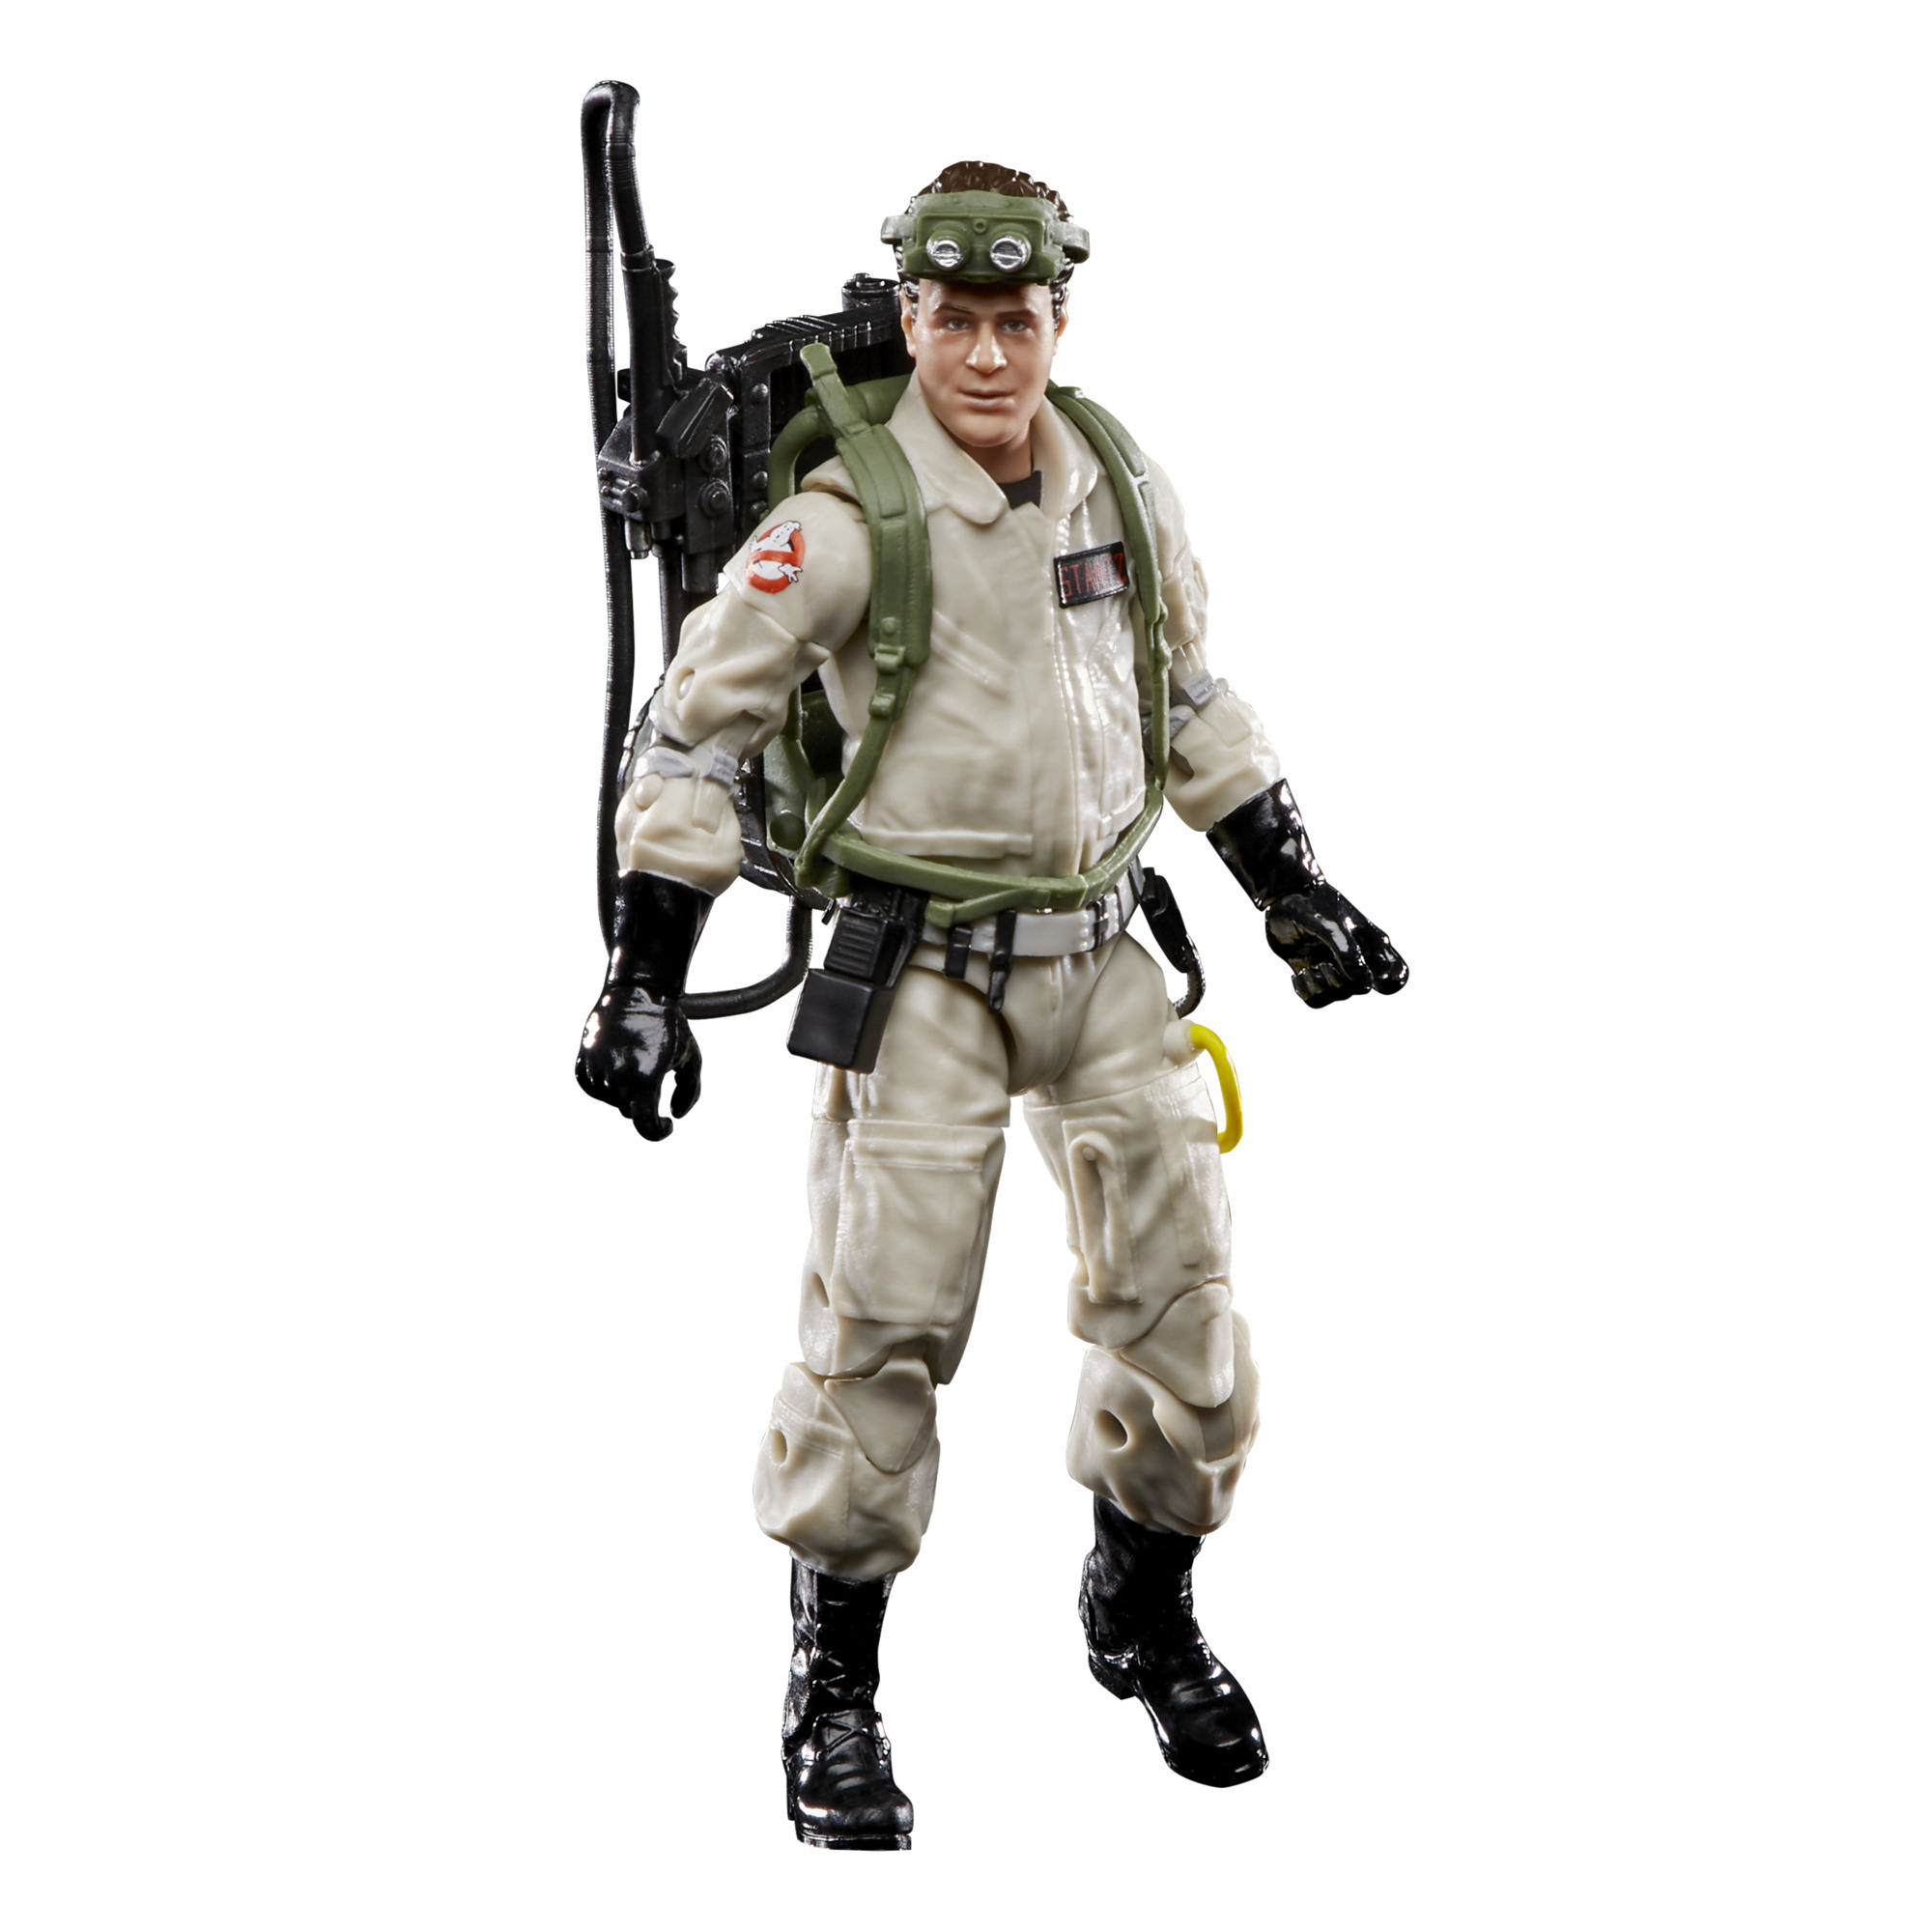 Ghostbusters Plasma Series Ray Stantz Toy 6-Inch-Scale Collectible Classic 1984 Ghostbusters Figure, Kids Ages 4 and Up